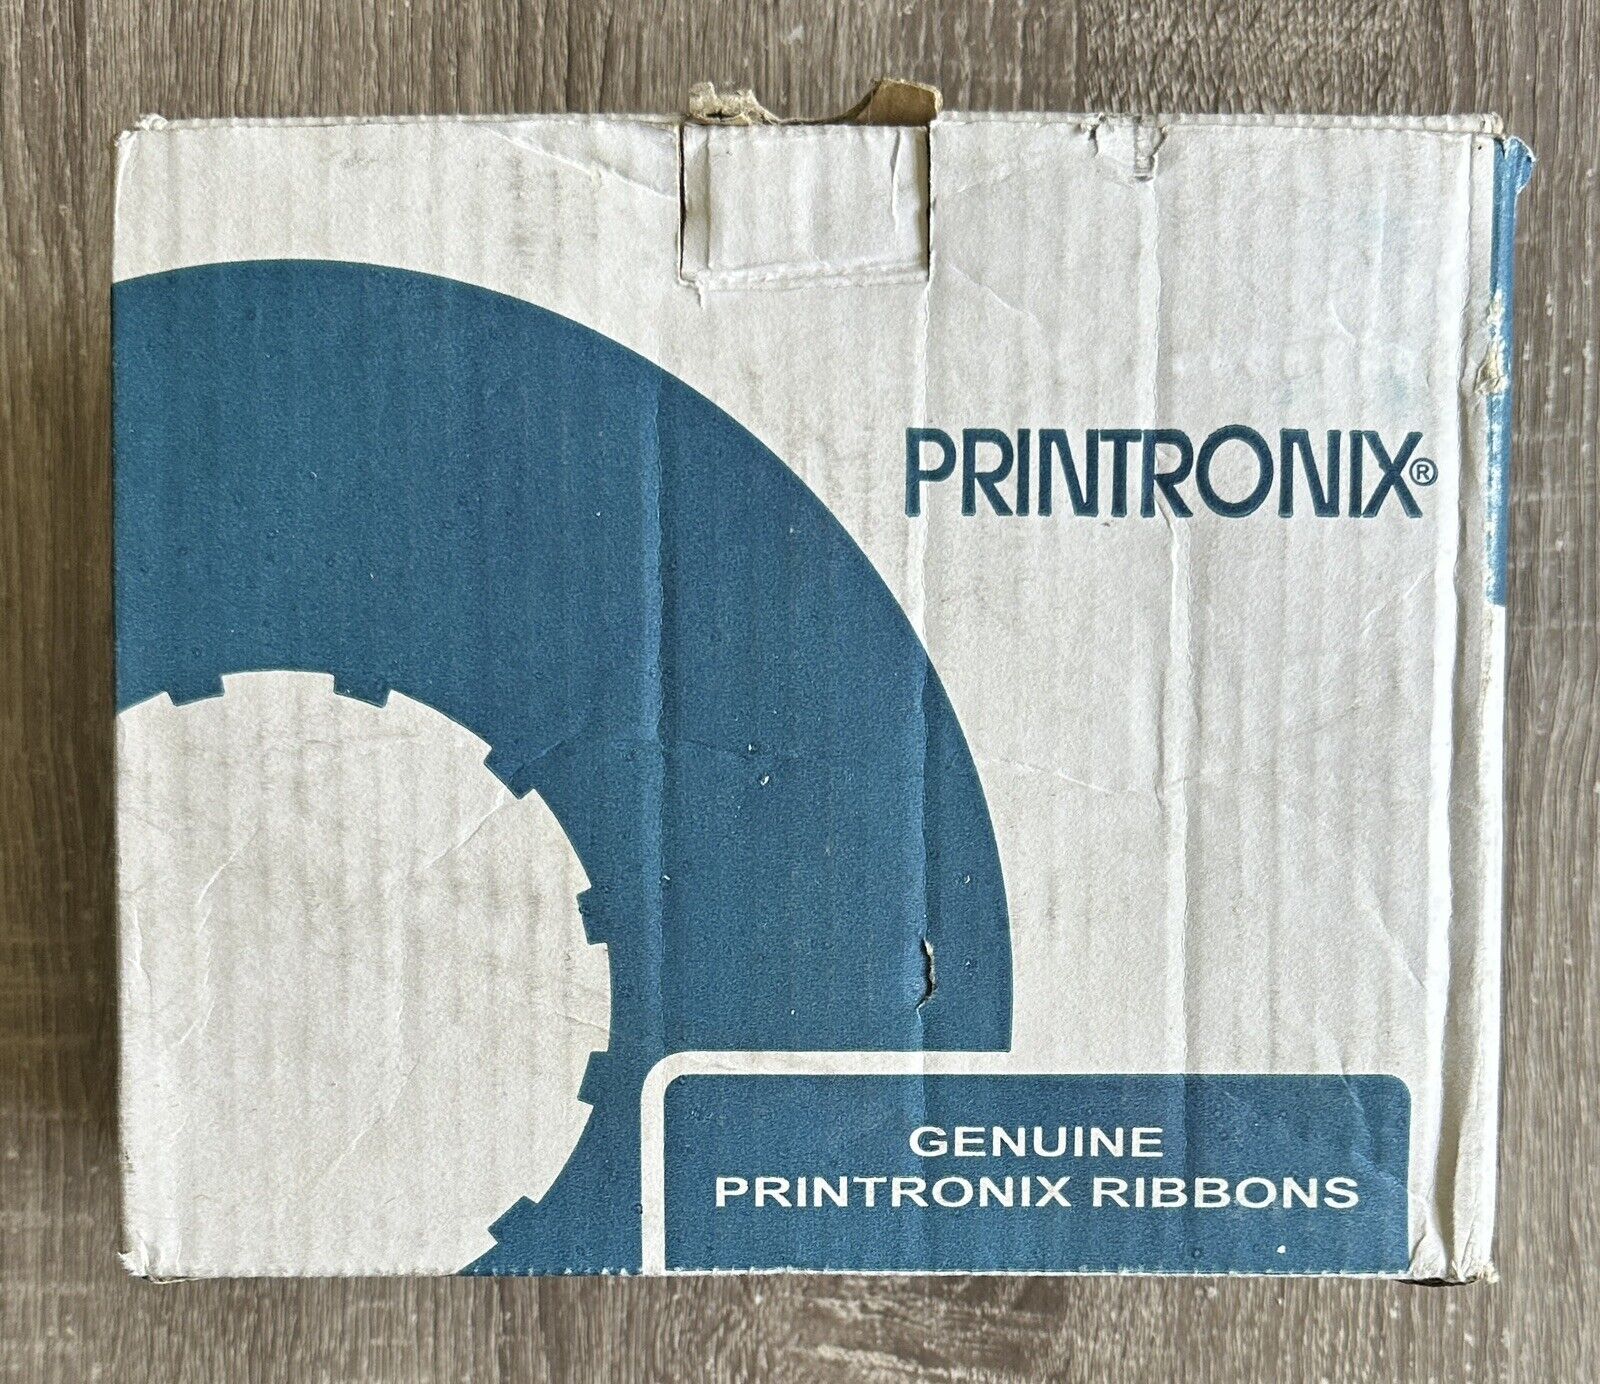 PRINTRONIX 107675-001 OPEN BOX OF 6 P5000 EXTENDED LIFE RIBBONS FACTORY SEALED